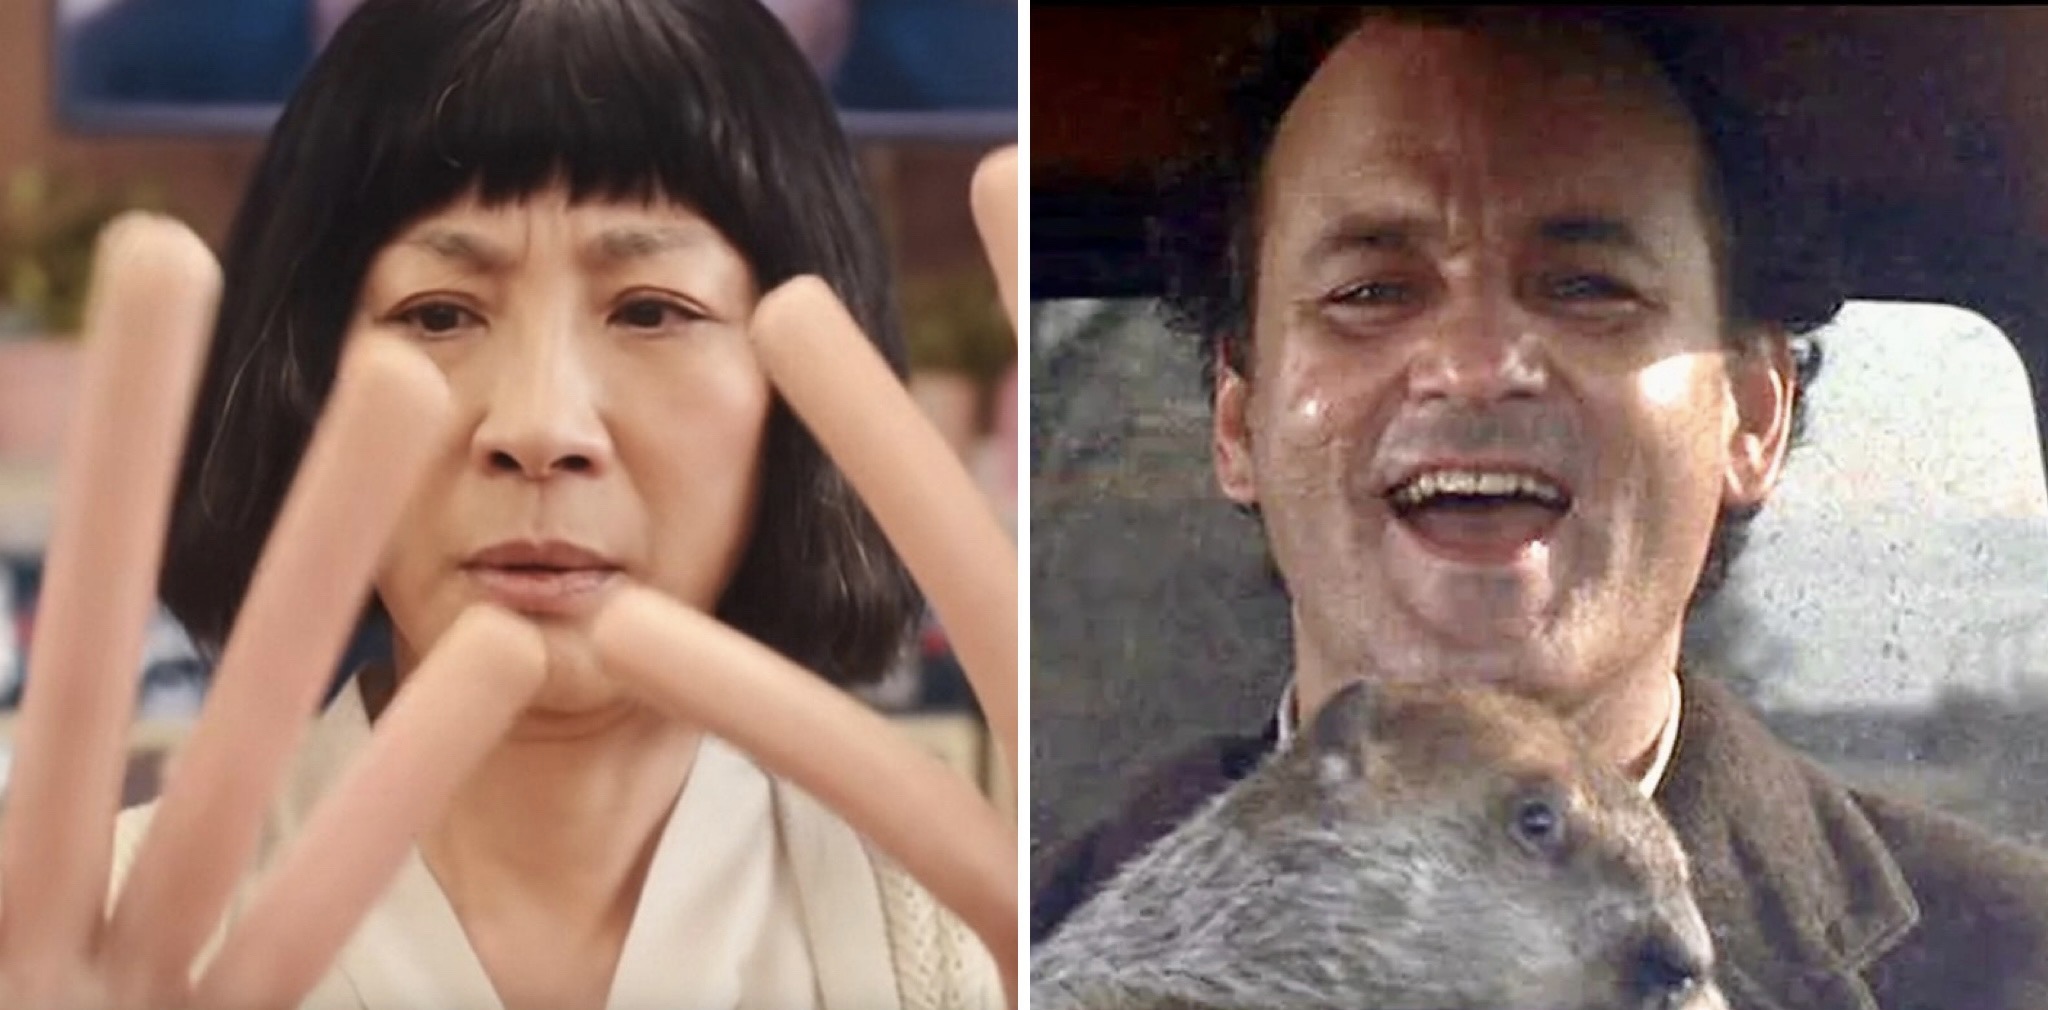 Everything Everywhere All at Once and Groundhog Day top streaming charts in Canada